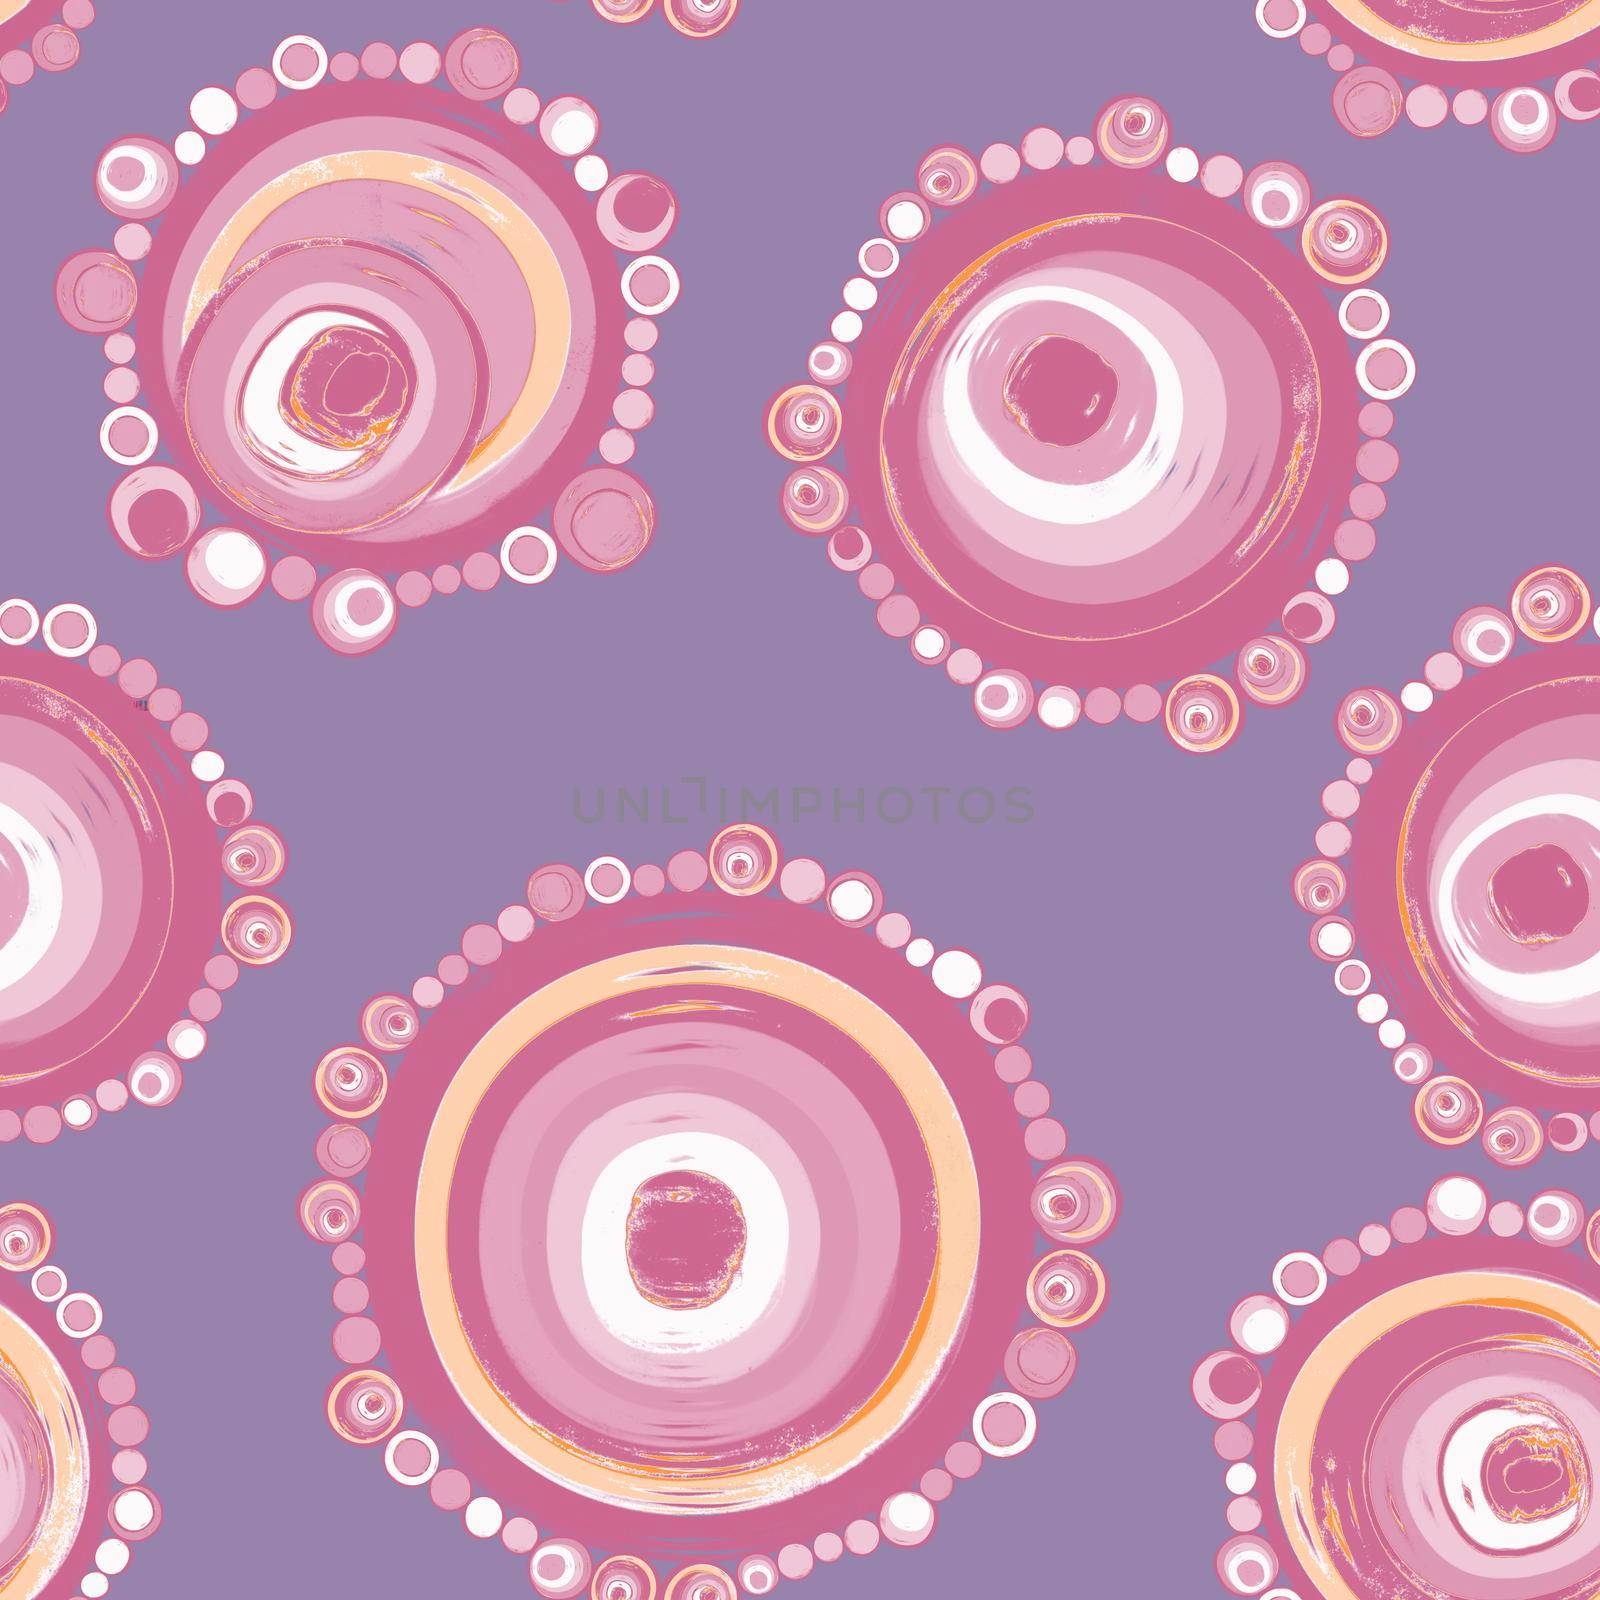 Geometric seamless pattern,texture with perfectly contacting nested circles with different size colors.Repeating pattern with circles filled with dots.For textile,wrapping paper,banner.Pastel shades by Angelsmoon